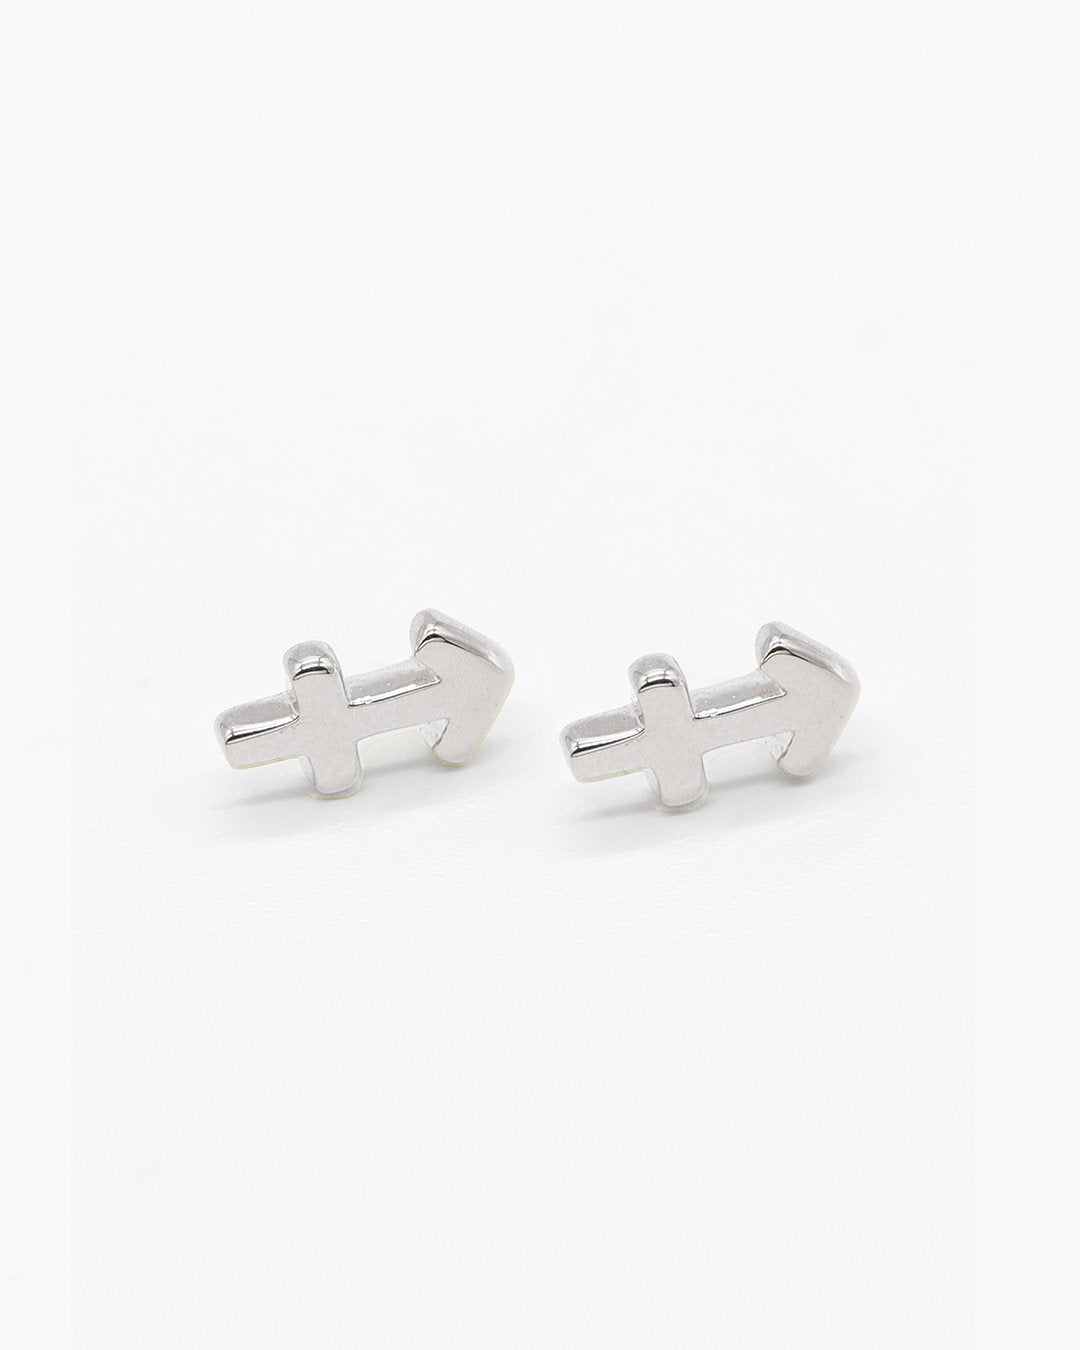 STAR SIGN STUDS - SILVER